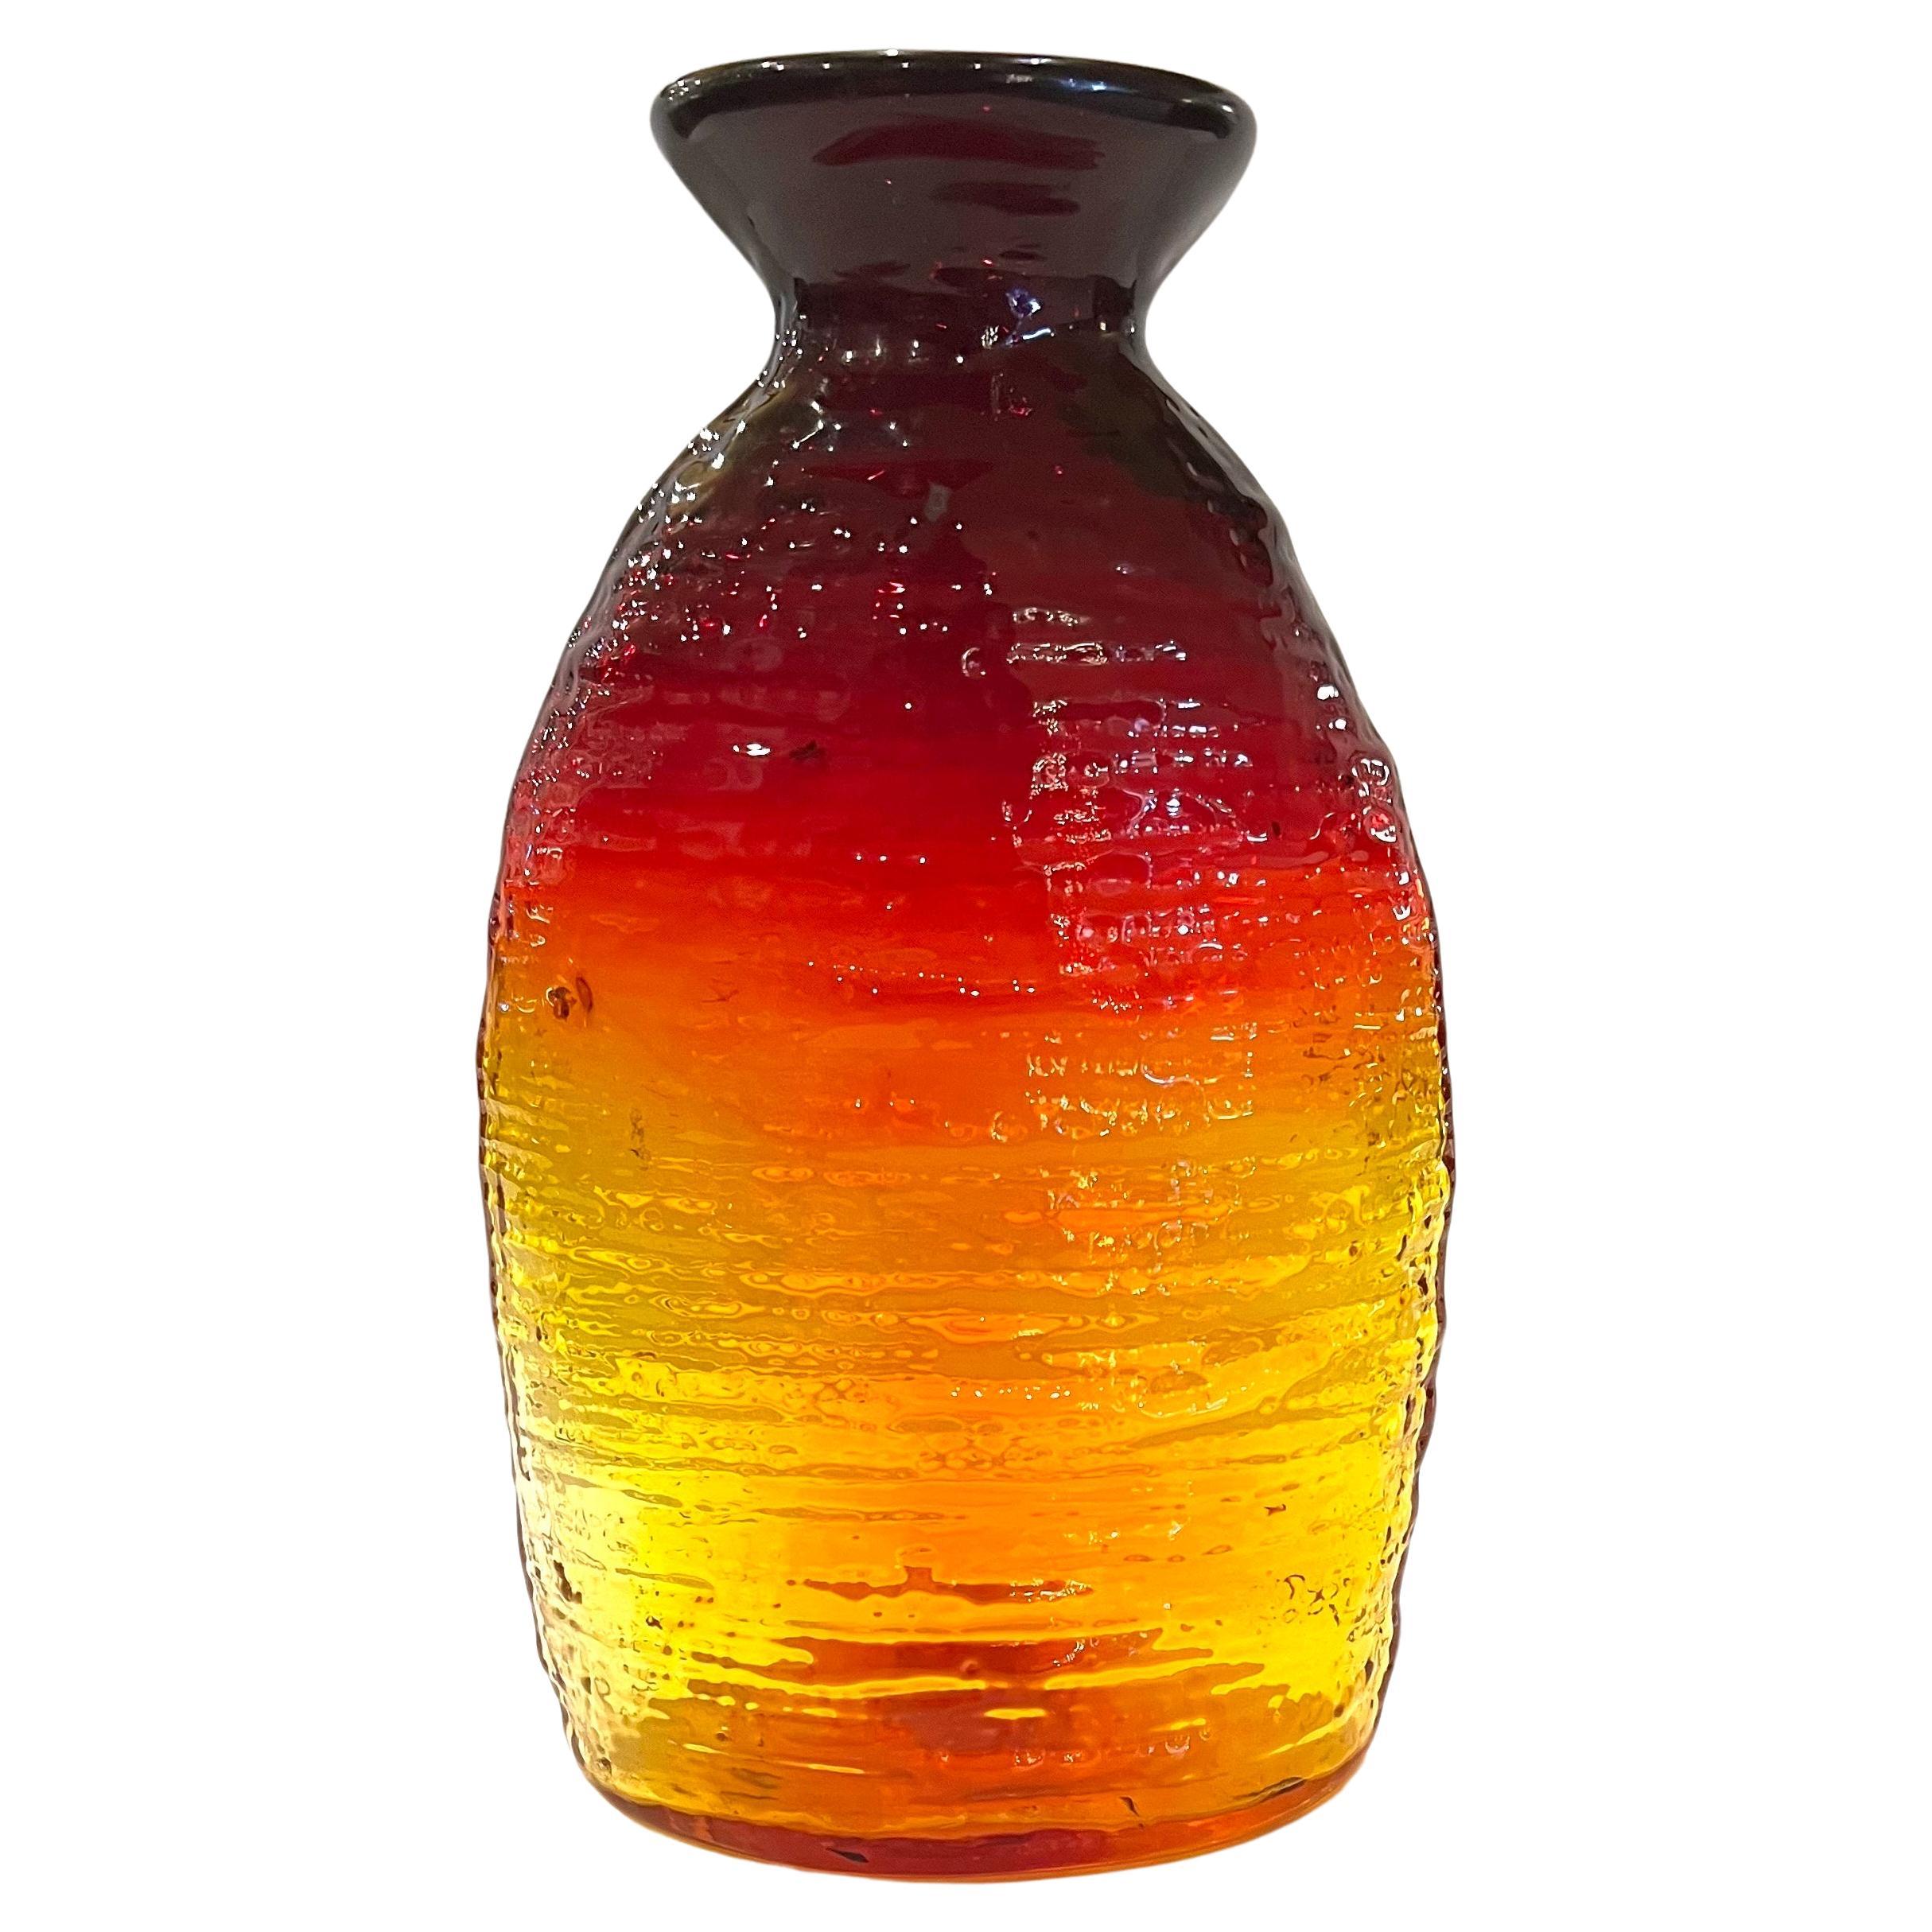  Collectible Amberina Glass 213SL Strata Vase by Blenko Signed and Dated 2005 For Sale